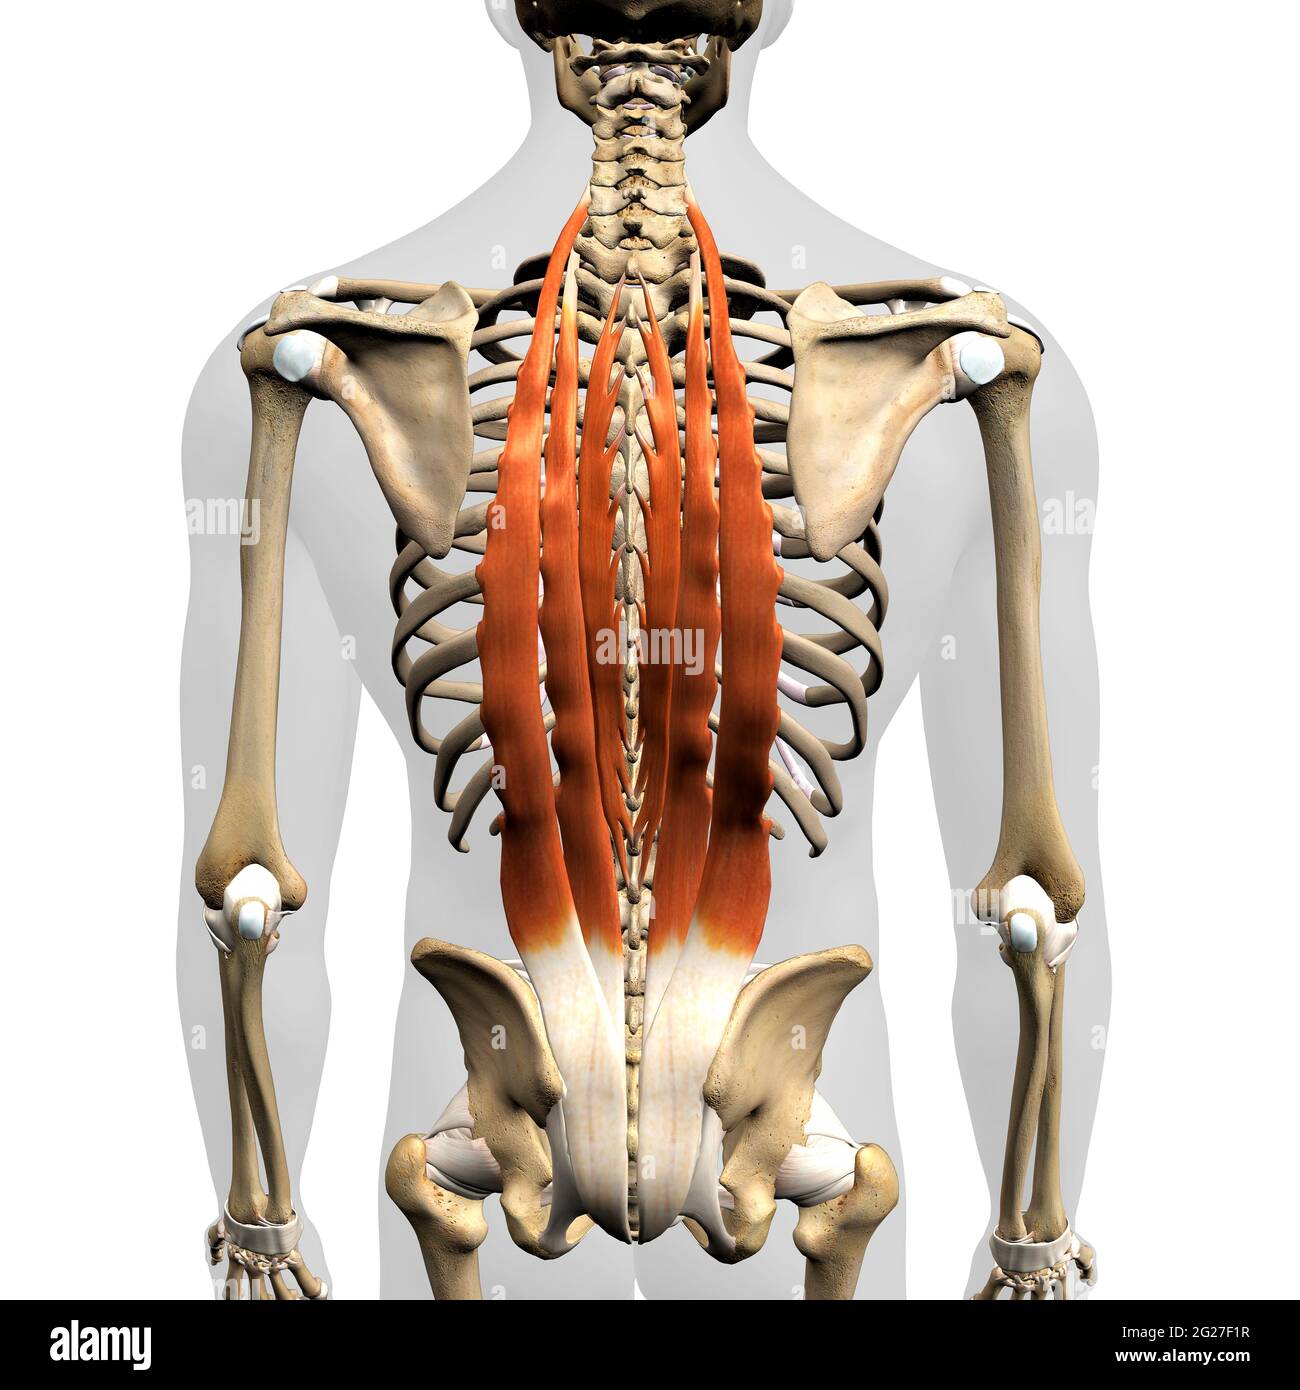 The erector spinae muscles of the human back with skeletal anatomy, on white background. Stock Photo